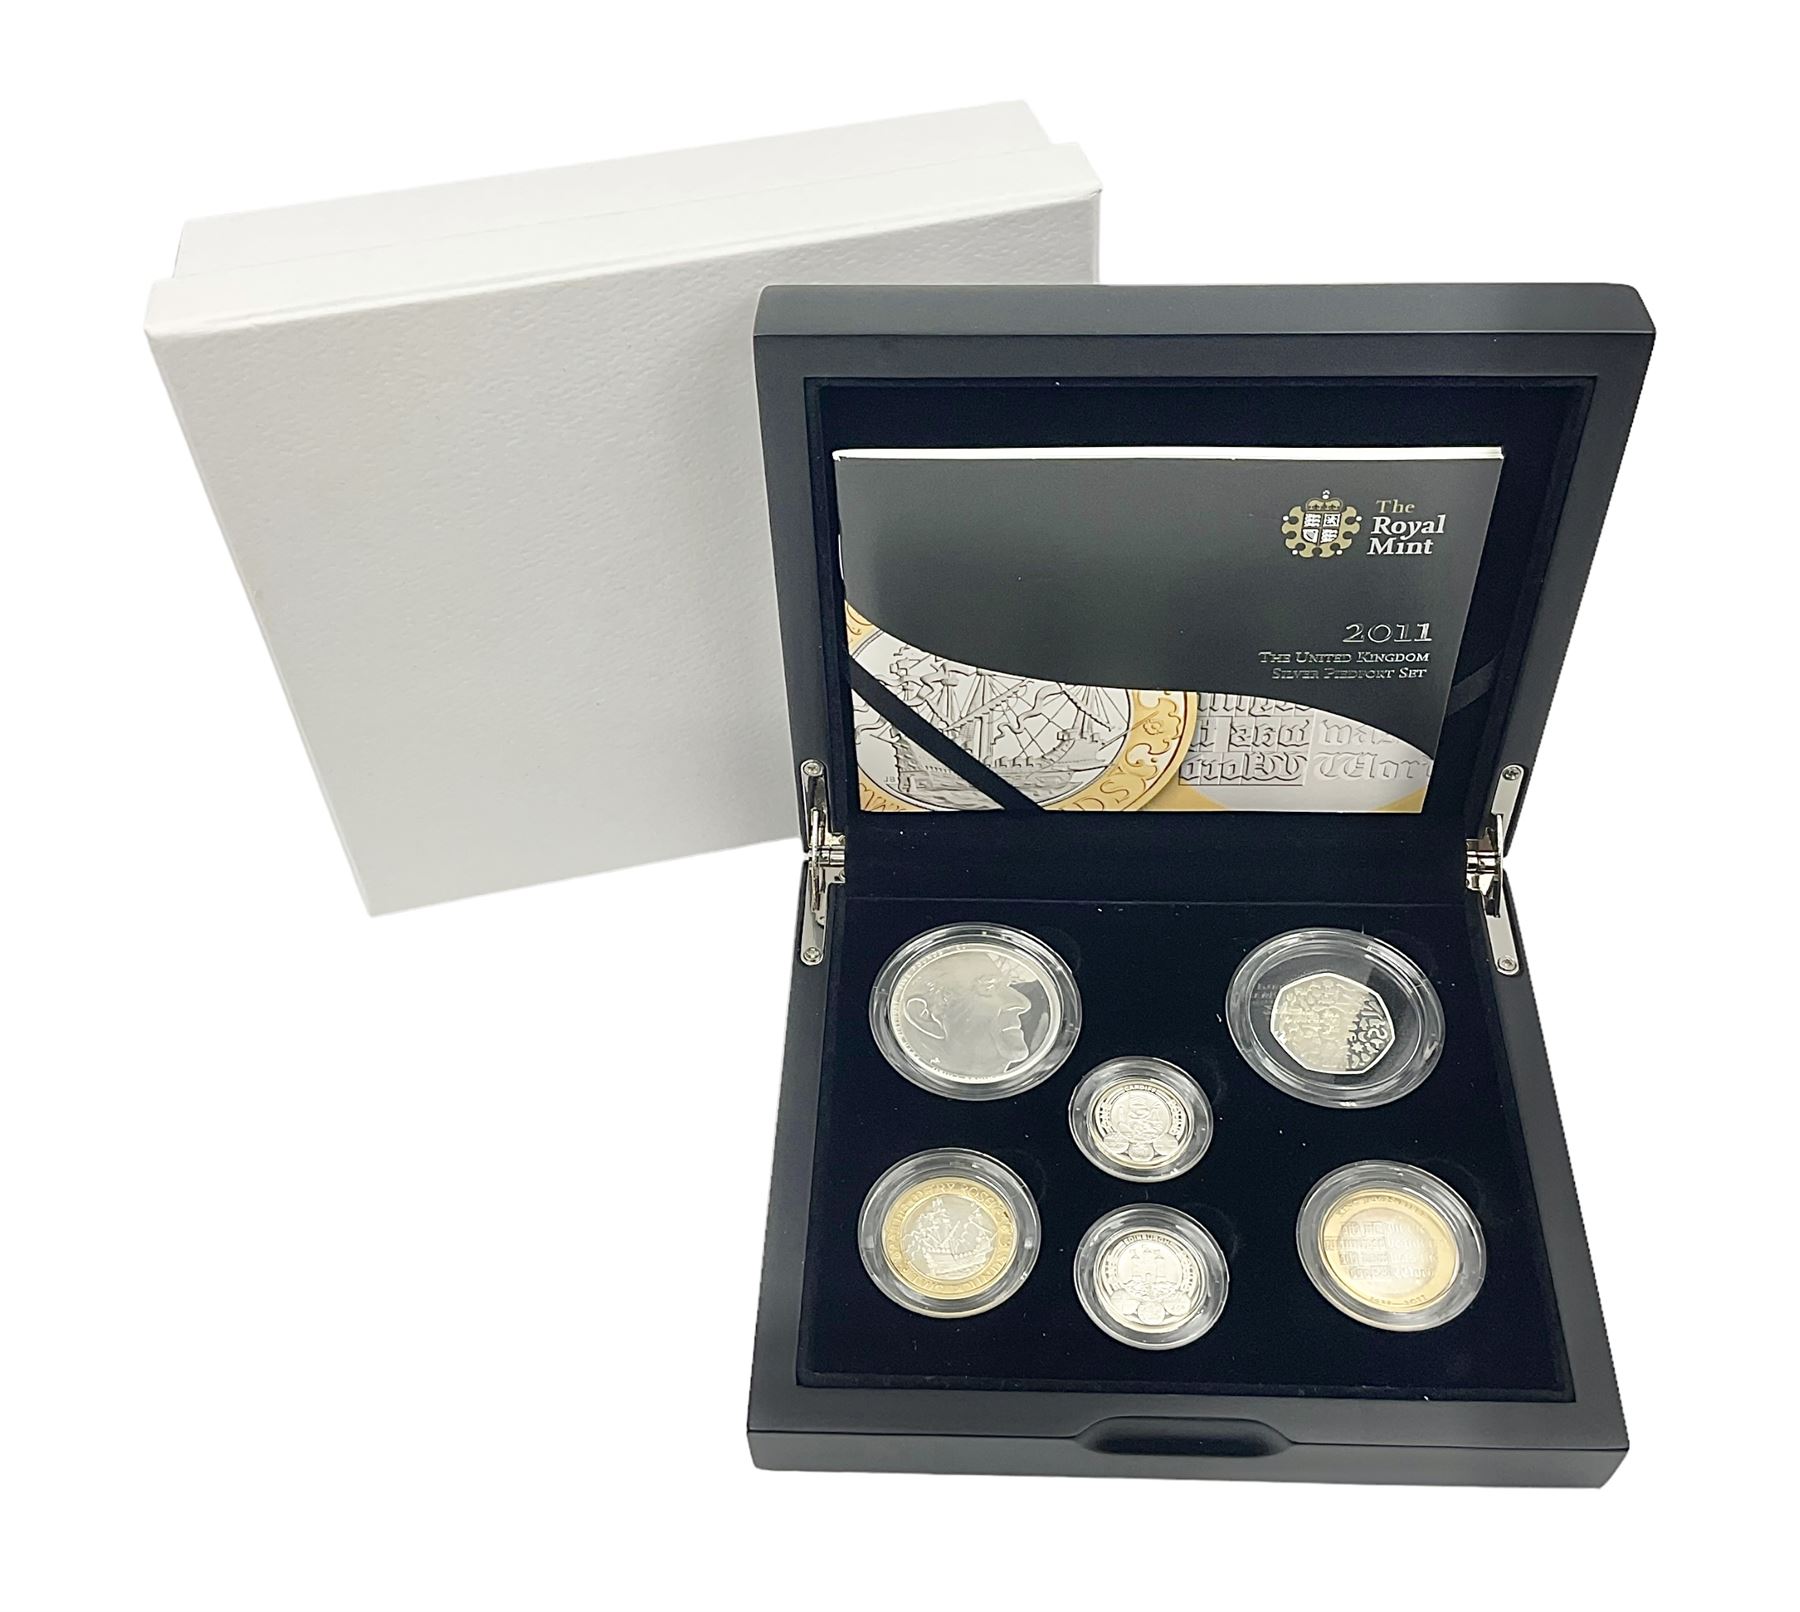 The Royal Mint United Kingdom 2011 silver proof piedfort six coin set